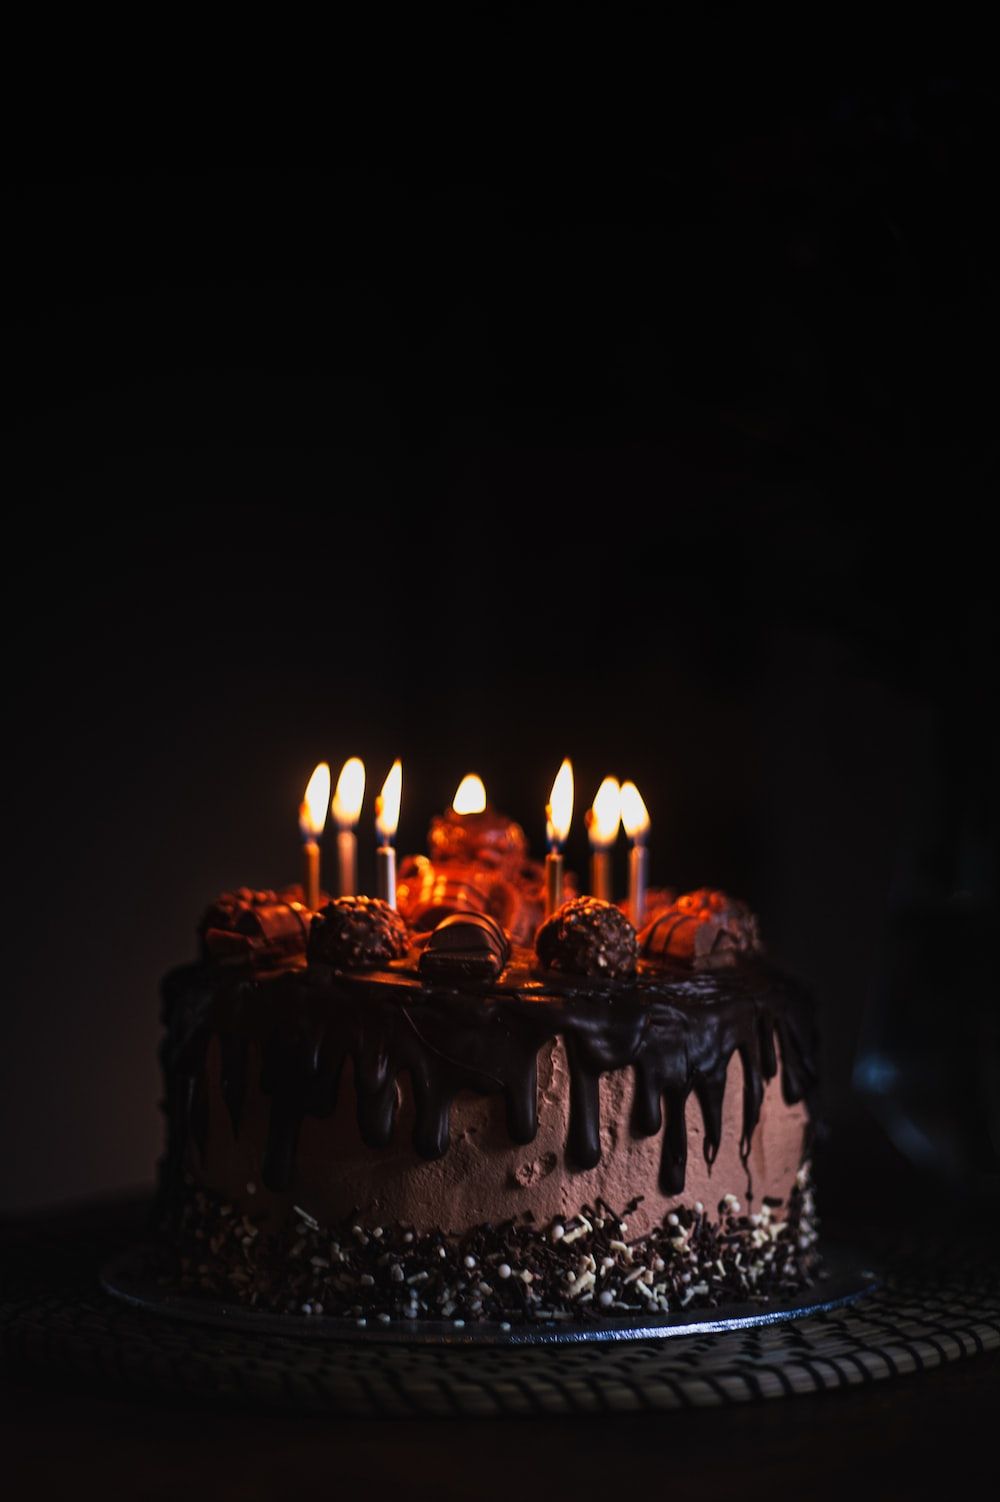 A chocolate cake with candles on a black background - Birthday